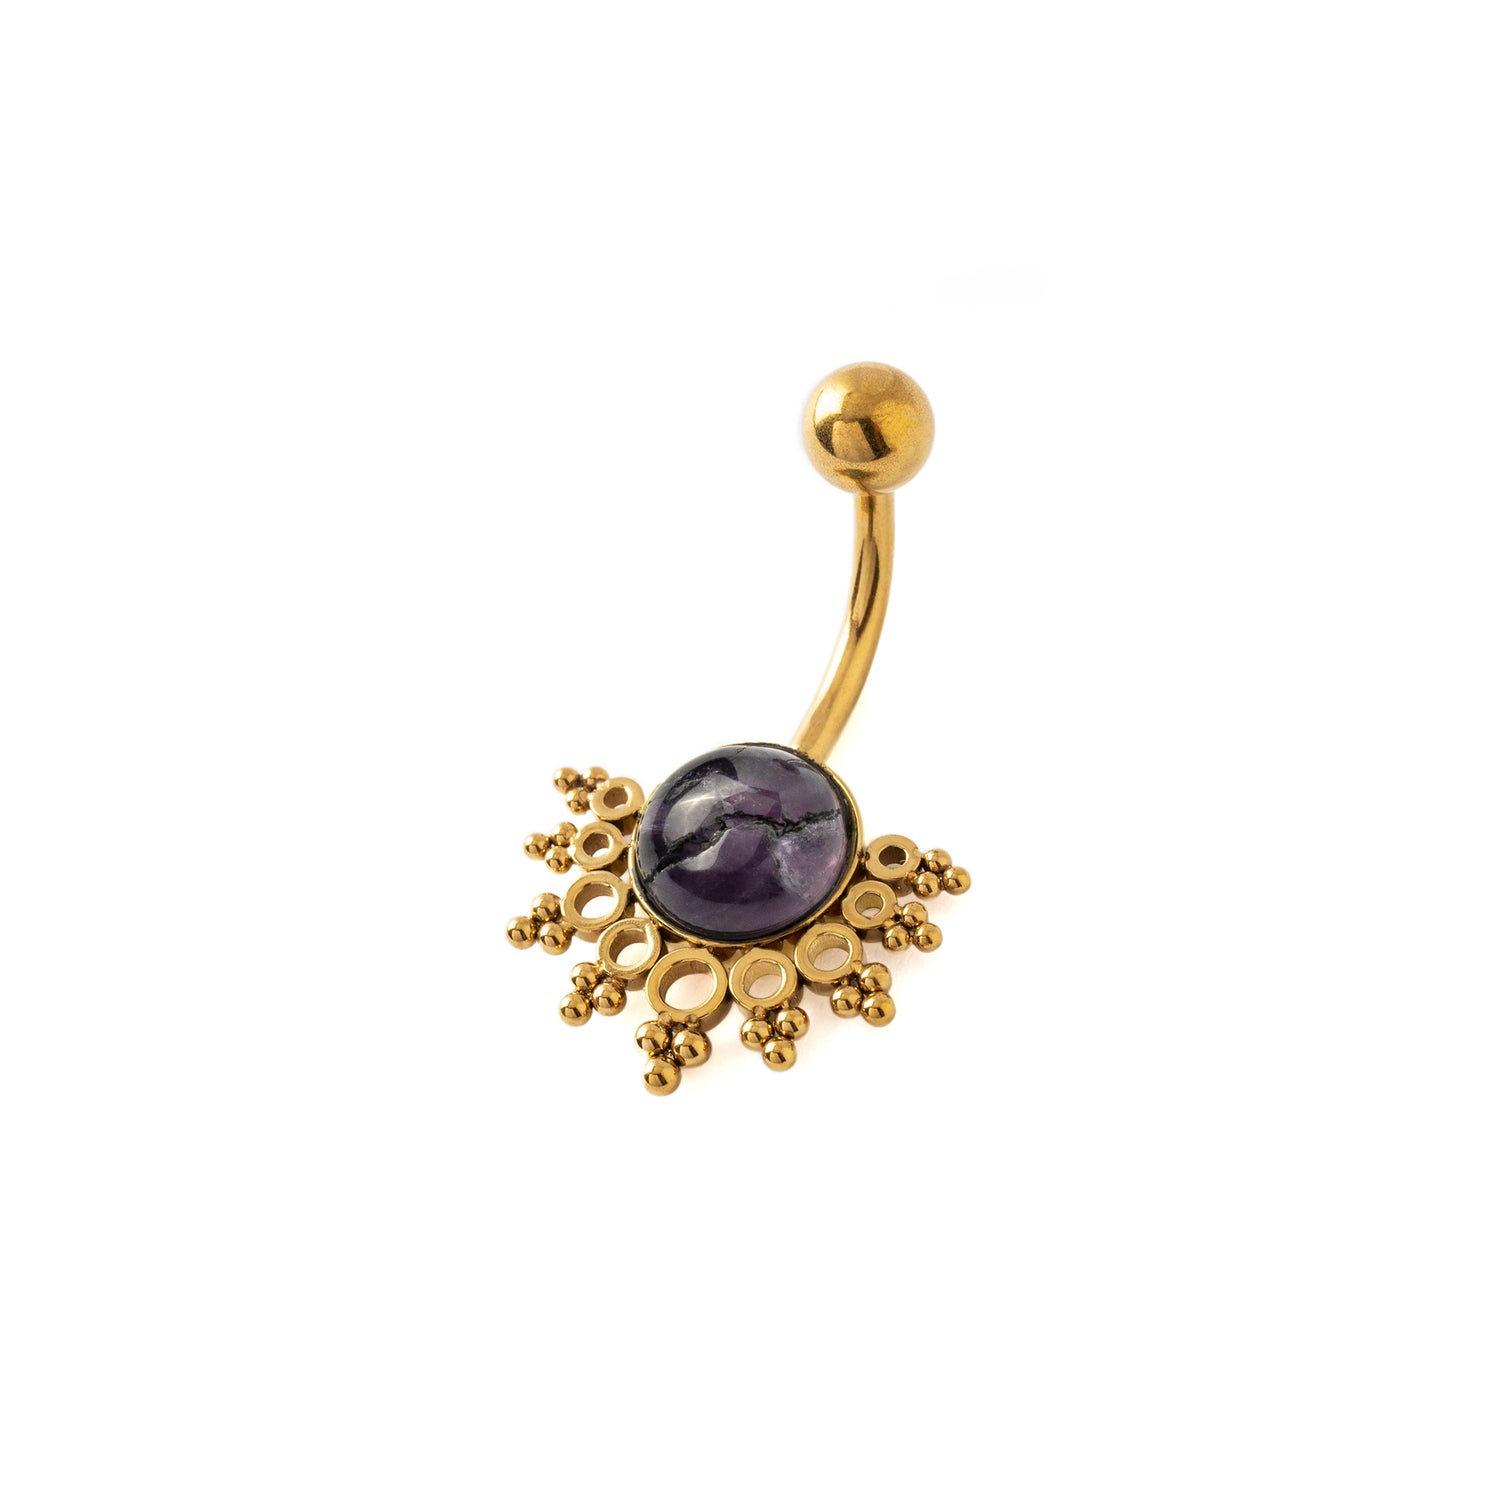 Tarita golden surgical steel belly bar with Amethyst right side view